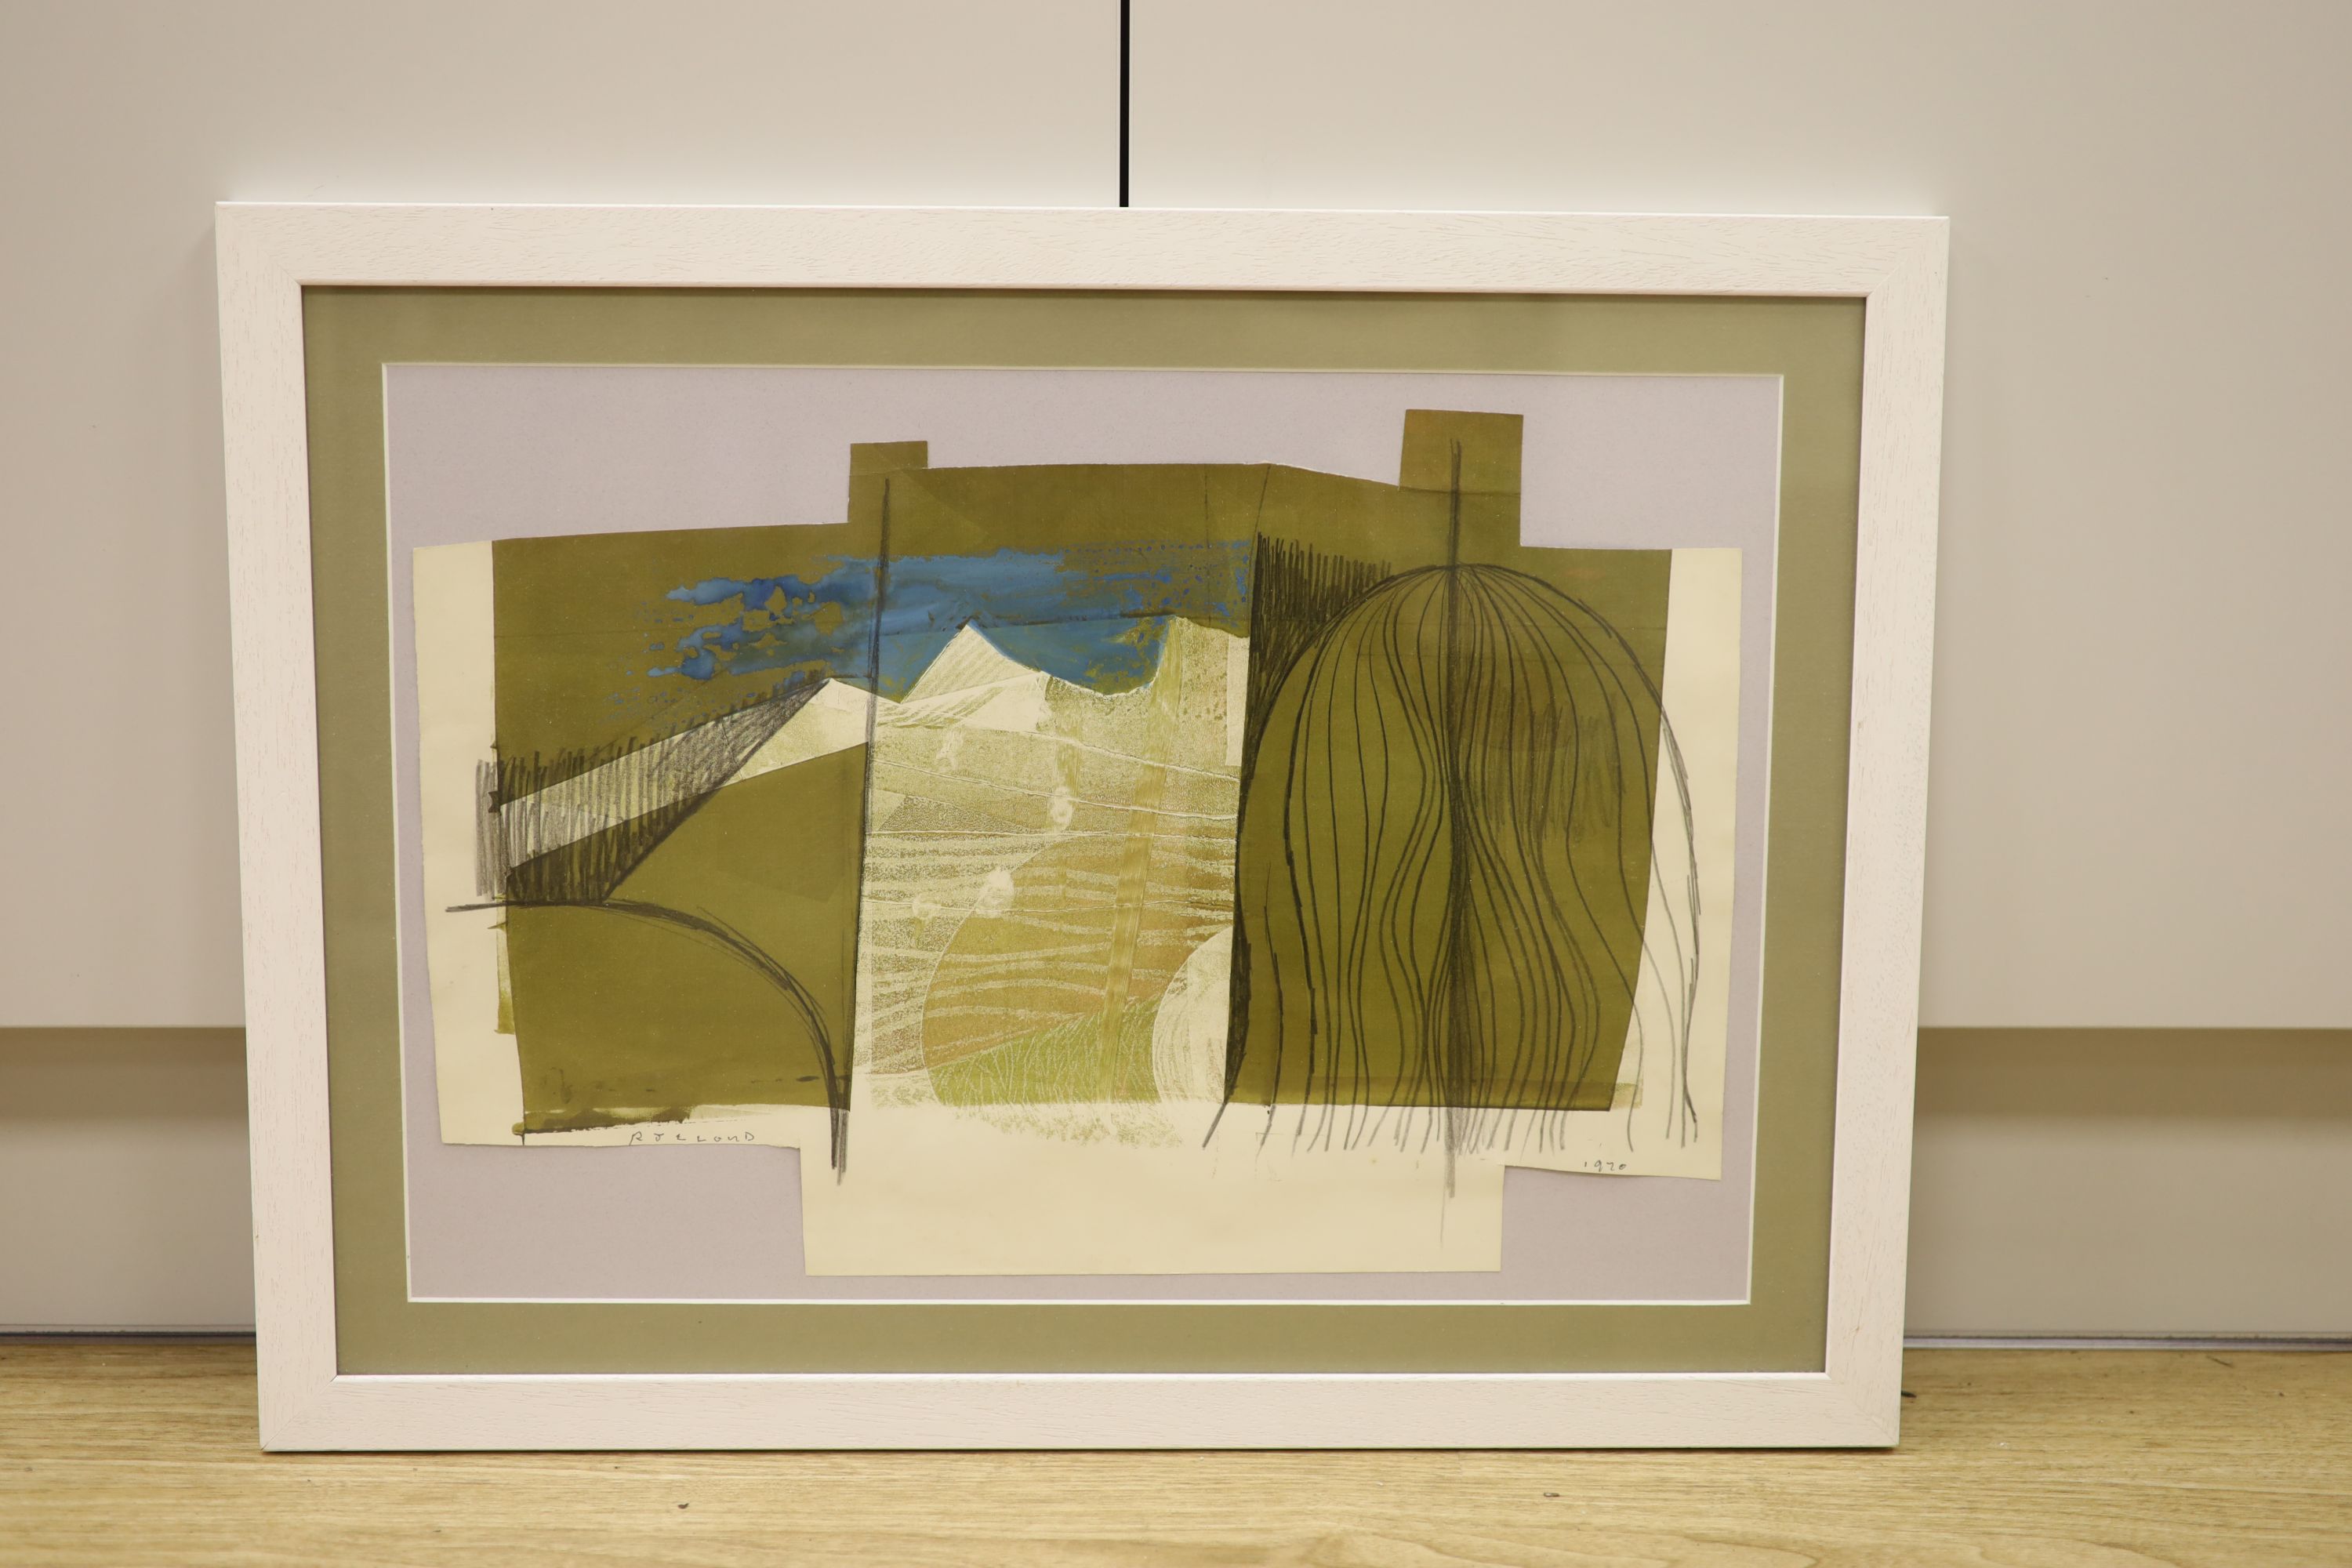 R. J. Lloyd, mixed media, Abstract landscape, signed and dated 1970, 35 x 51cm